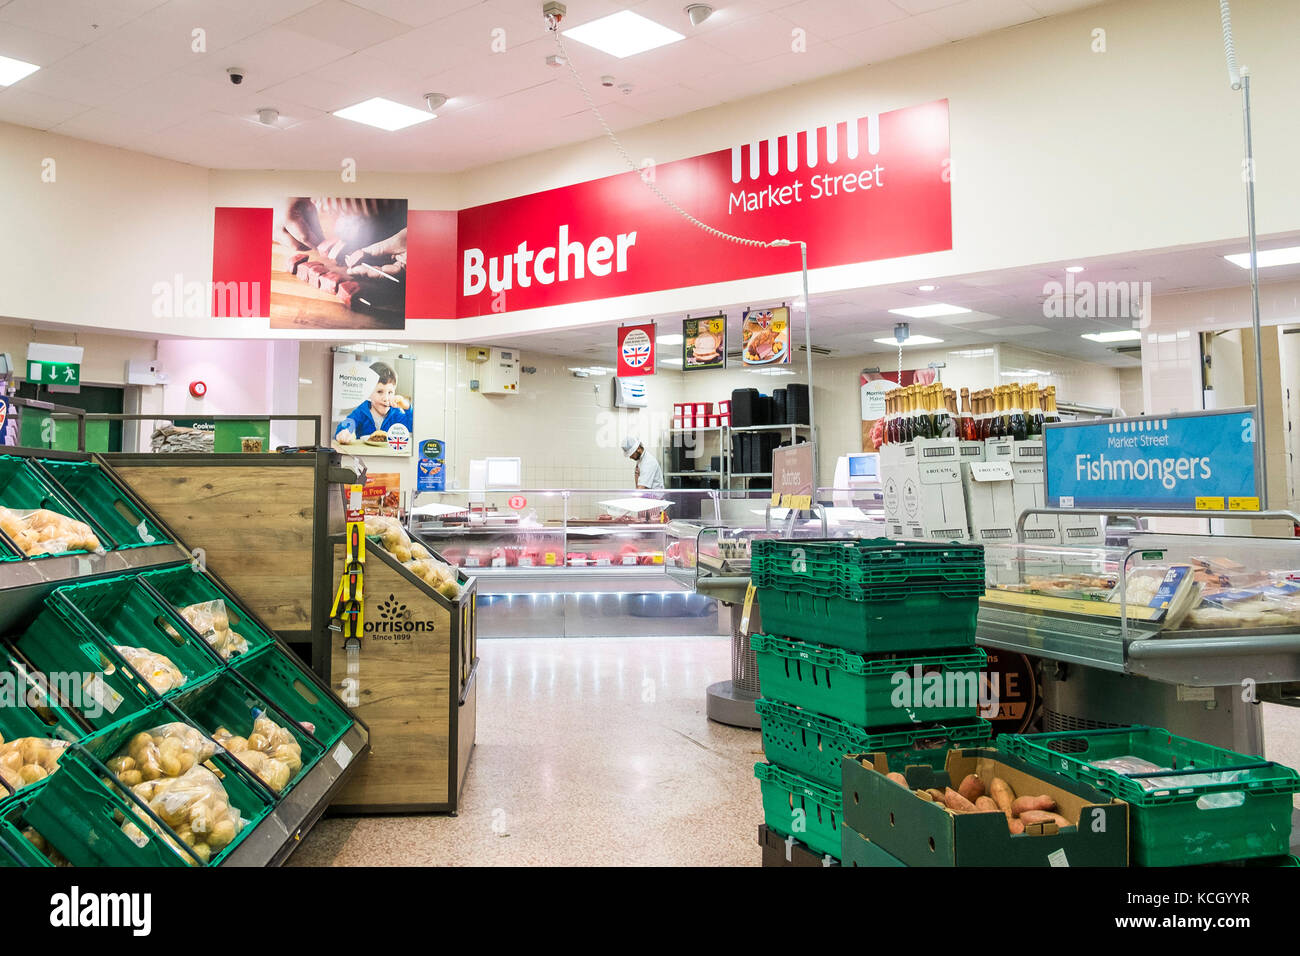 Shopping in a supermarket - butcher in a Morrisons Supermarket. Stock Photo